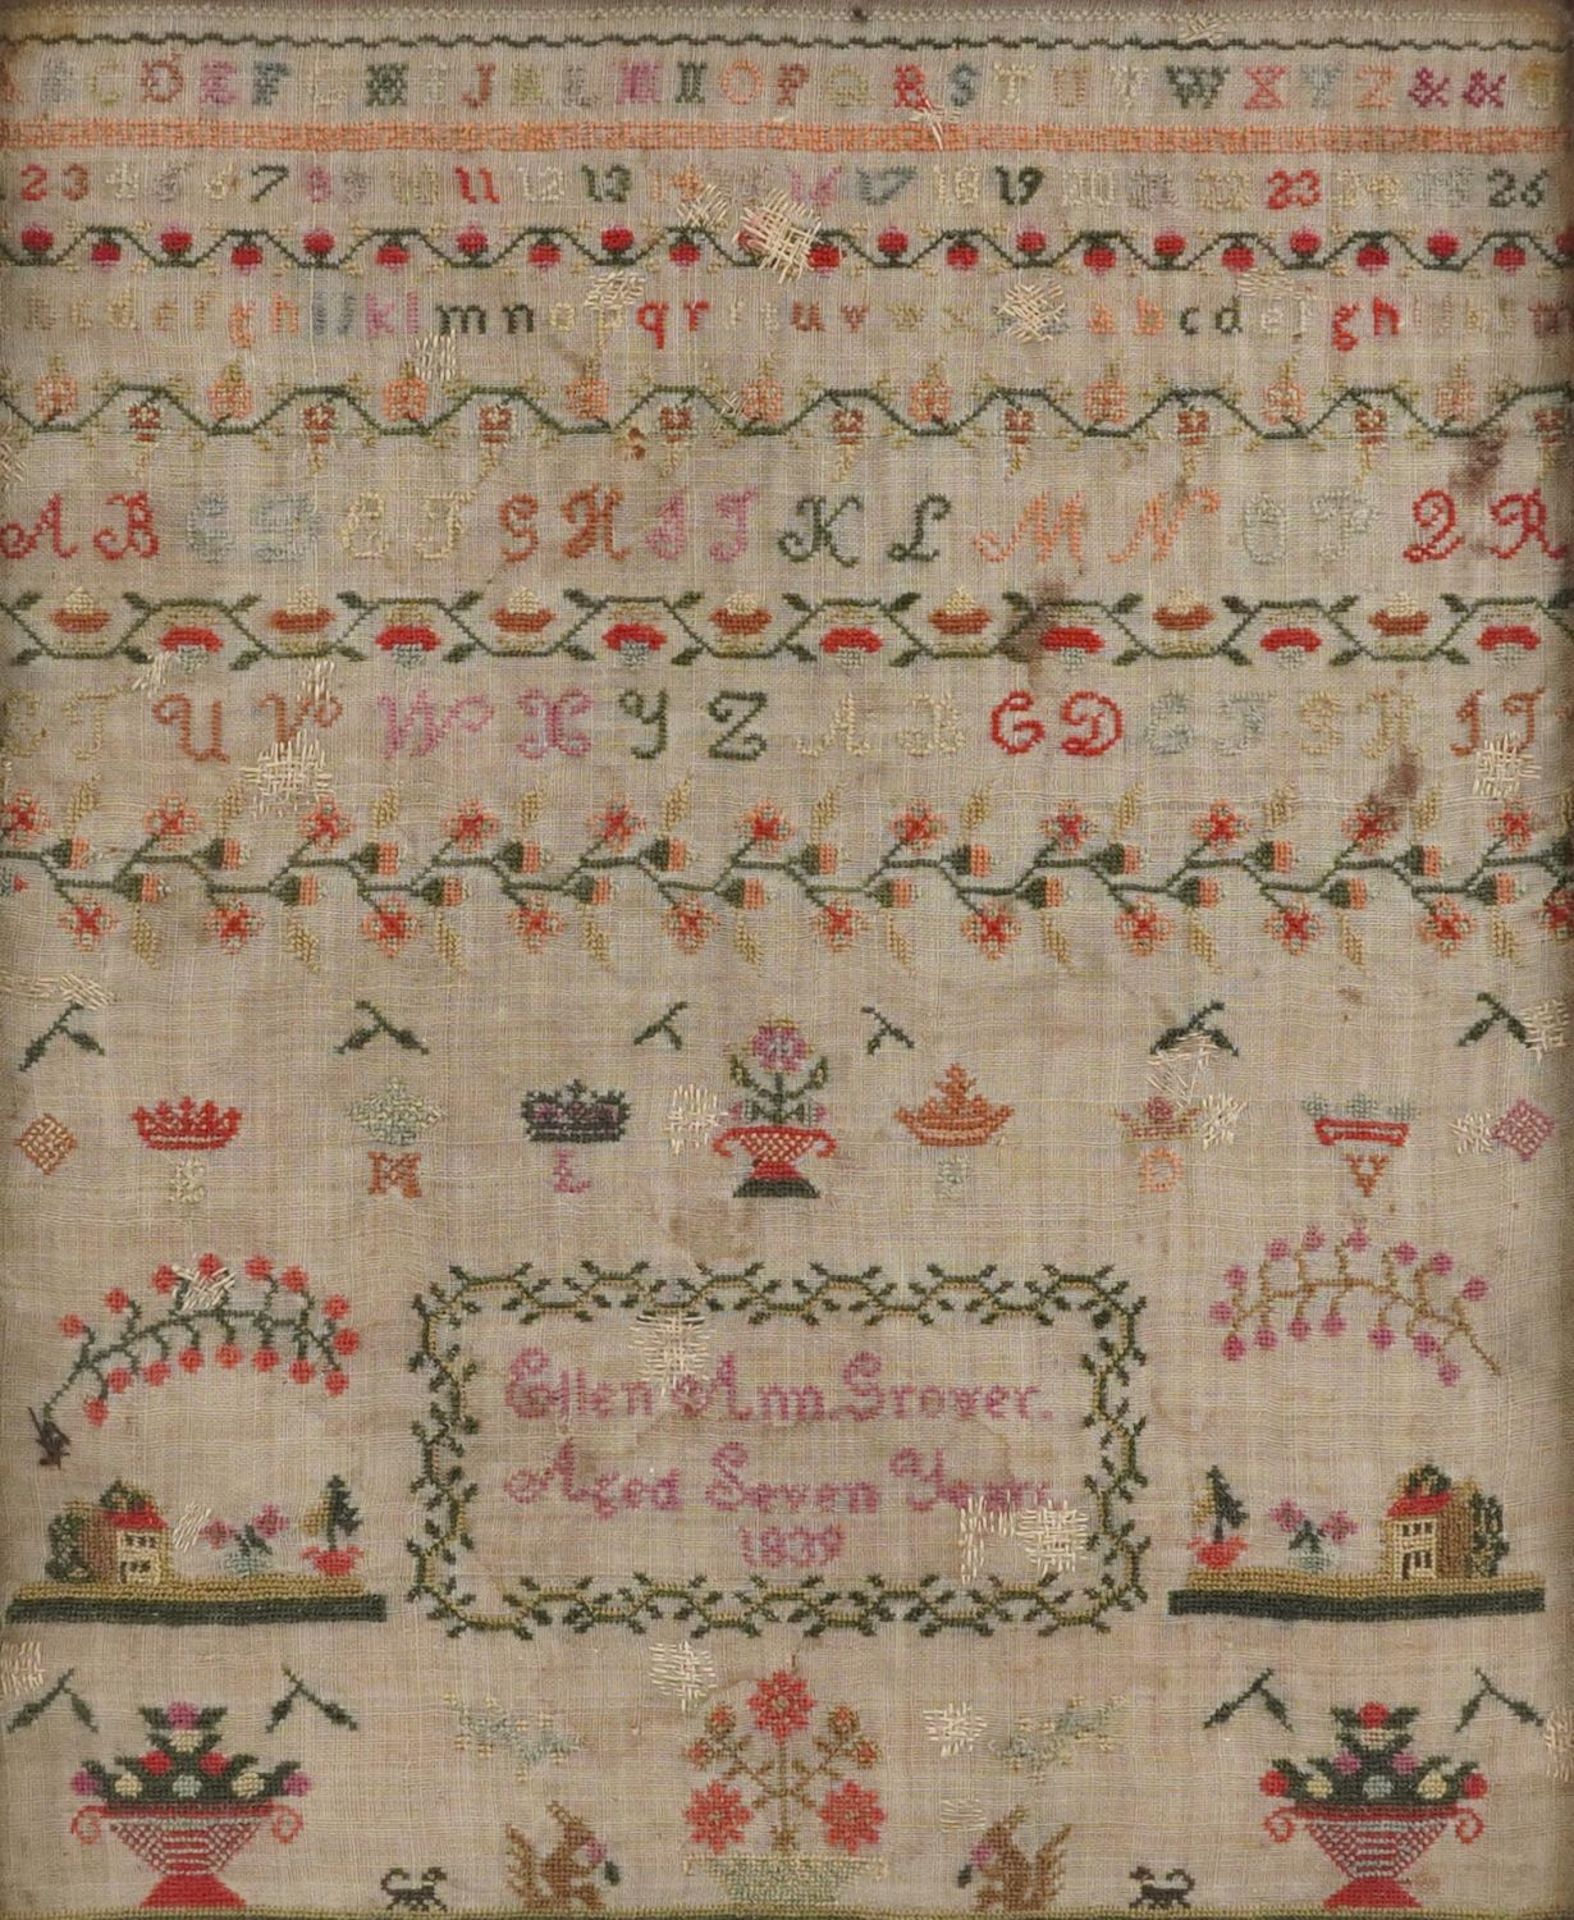 Early Victorian needlework sampler worked by Ellen Ann Grover aged seven years, dated 1839, framed